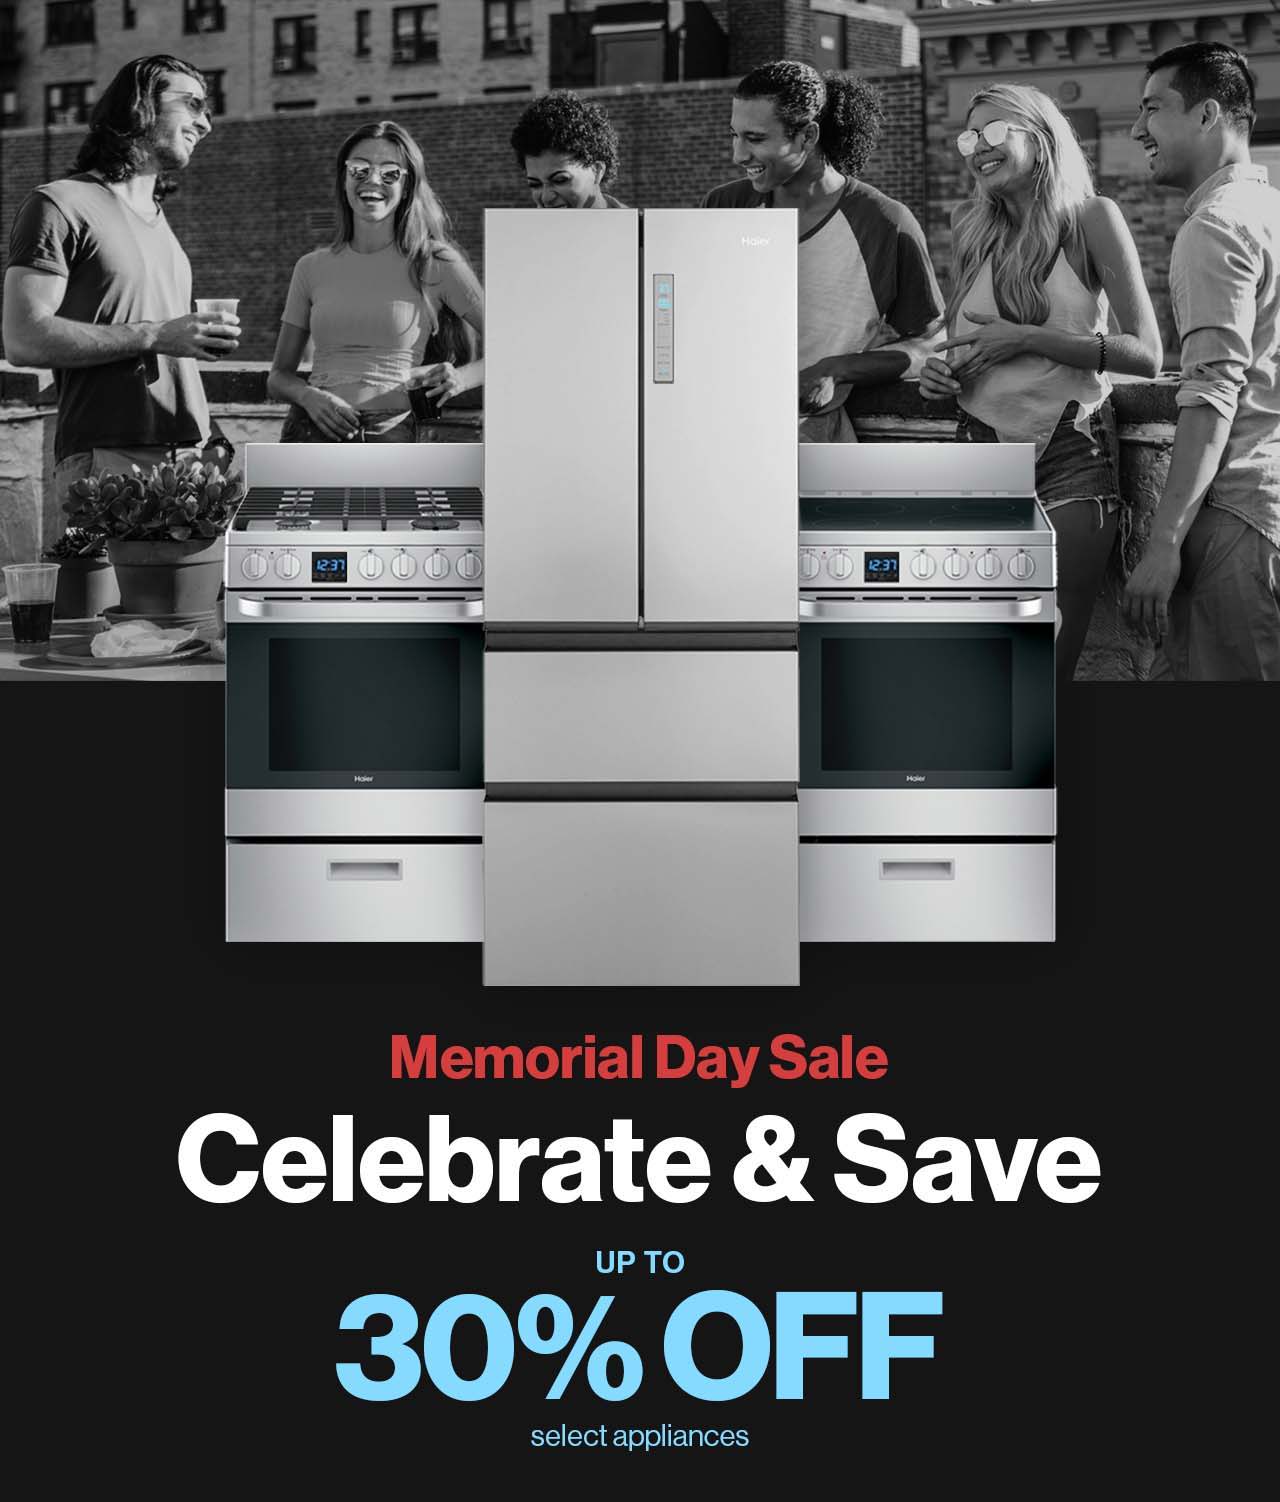 Haier Memorial Day Sale. Celebrate and Save up to 30% off select appliances.